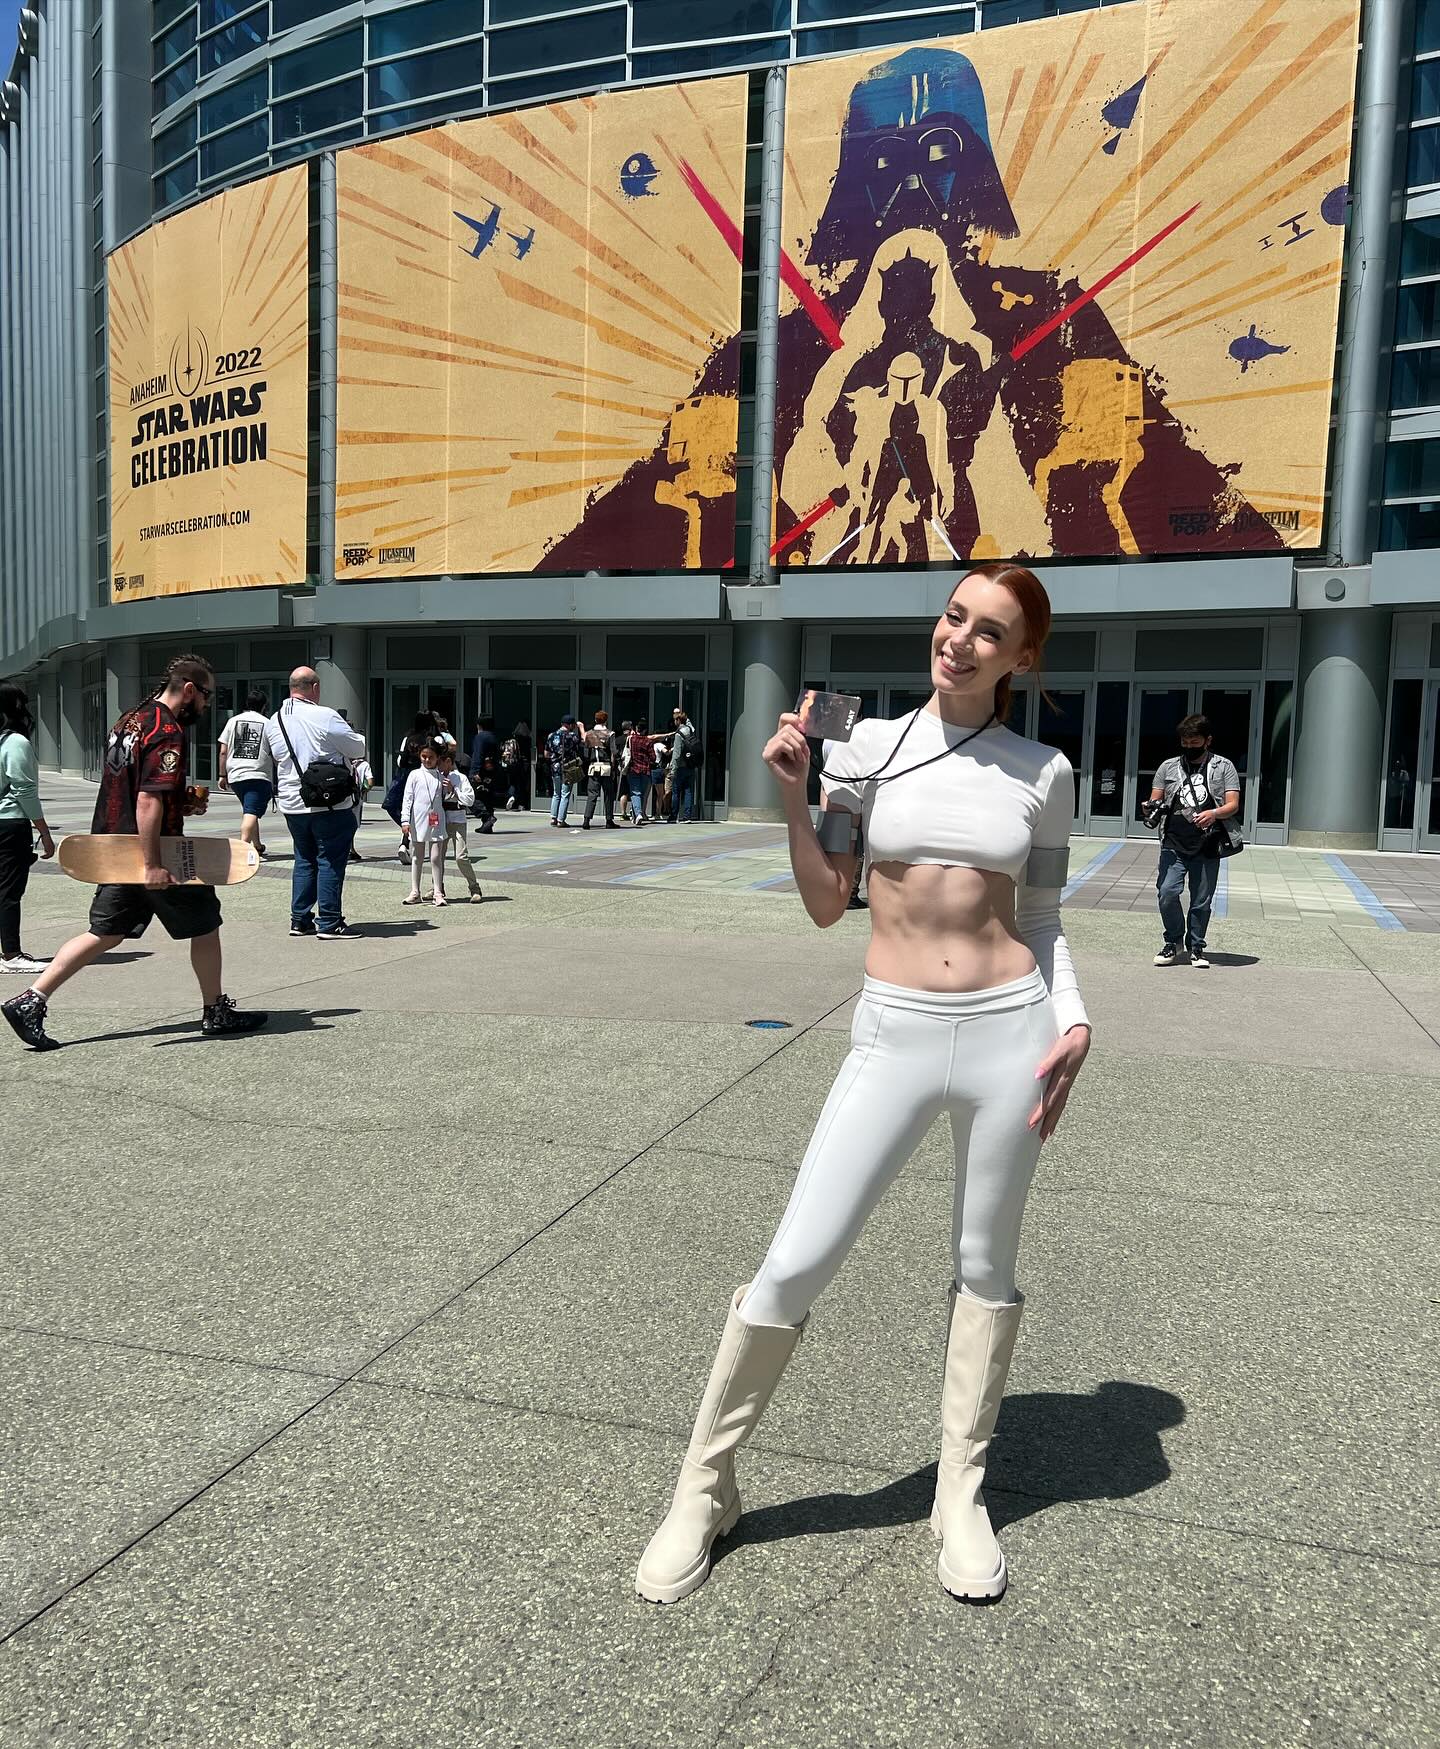 May the 4th be with you! Had to put together a little photodump of some of my favourite Star Wars fandom moments, and some from #starwarscelebration last year and the year before ✨ speaking of which…guess who will be in Japan for celebration next year? (Me!) 🤭

#starwars #maythe4thbewithyou #starwarsday #starwarsnerd #starwarsfan #redhead